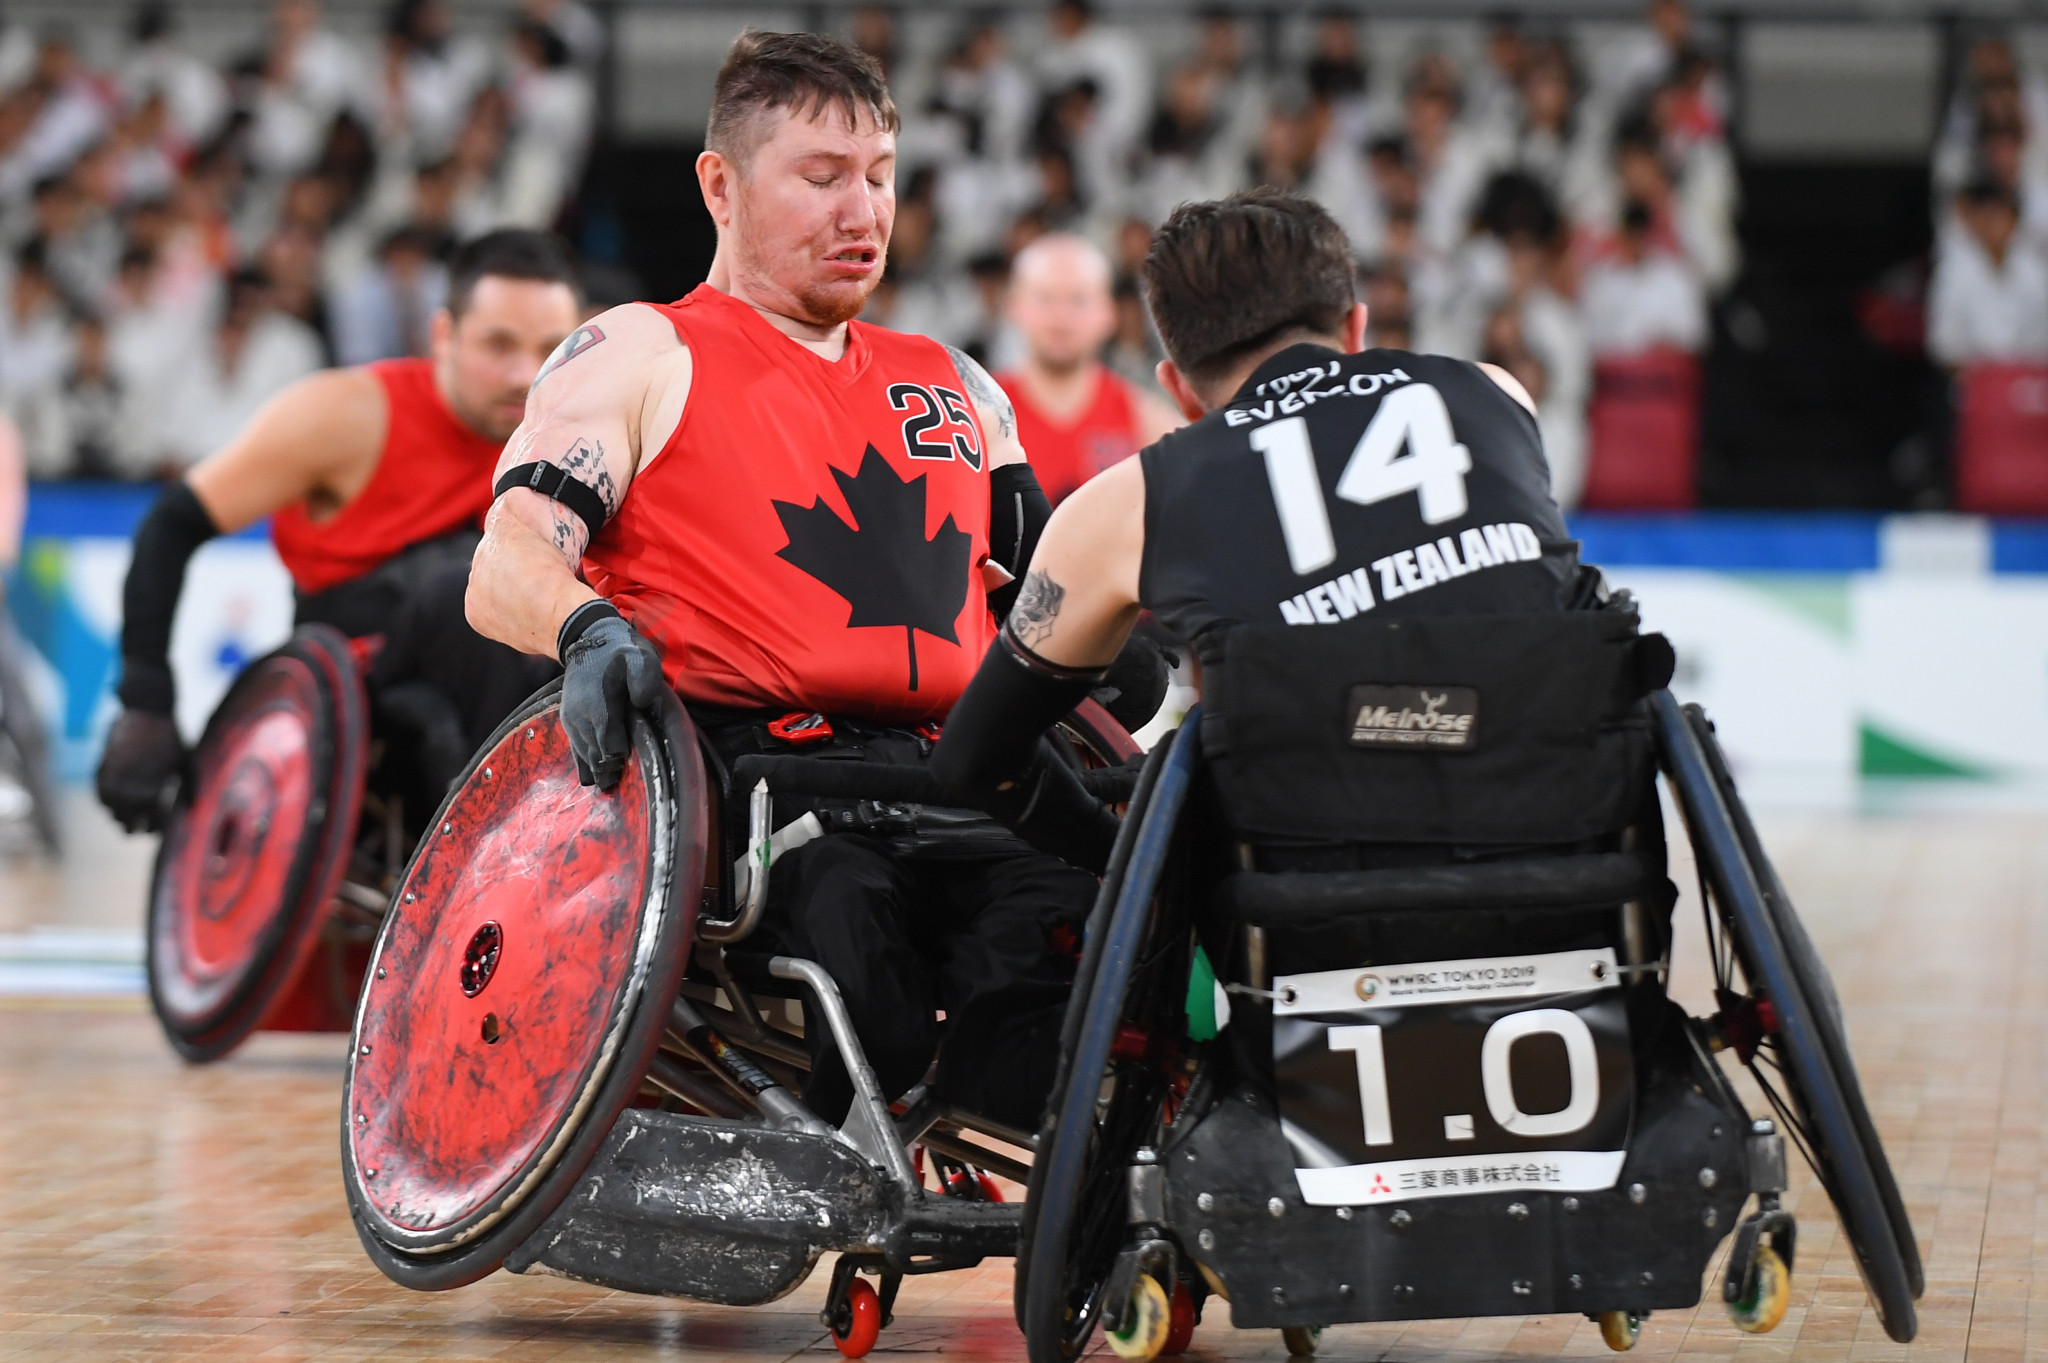 The World Wheelchair Rugby Challenge helped increase the sport's exposure ©Getty Images